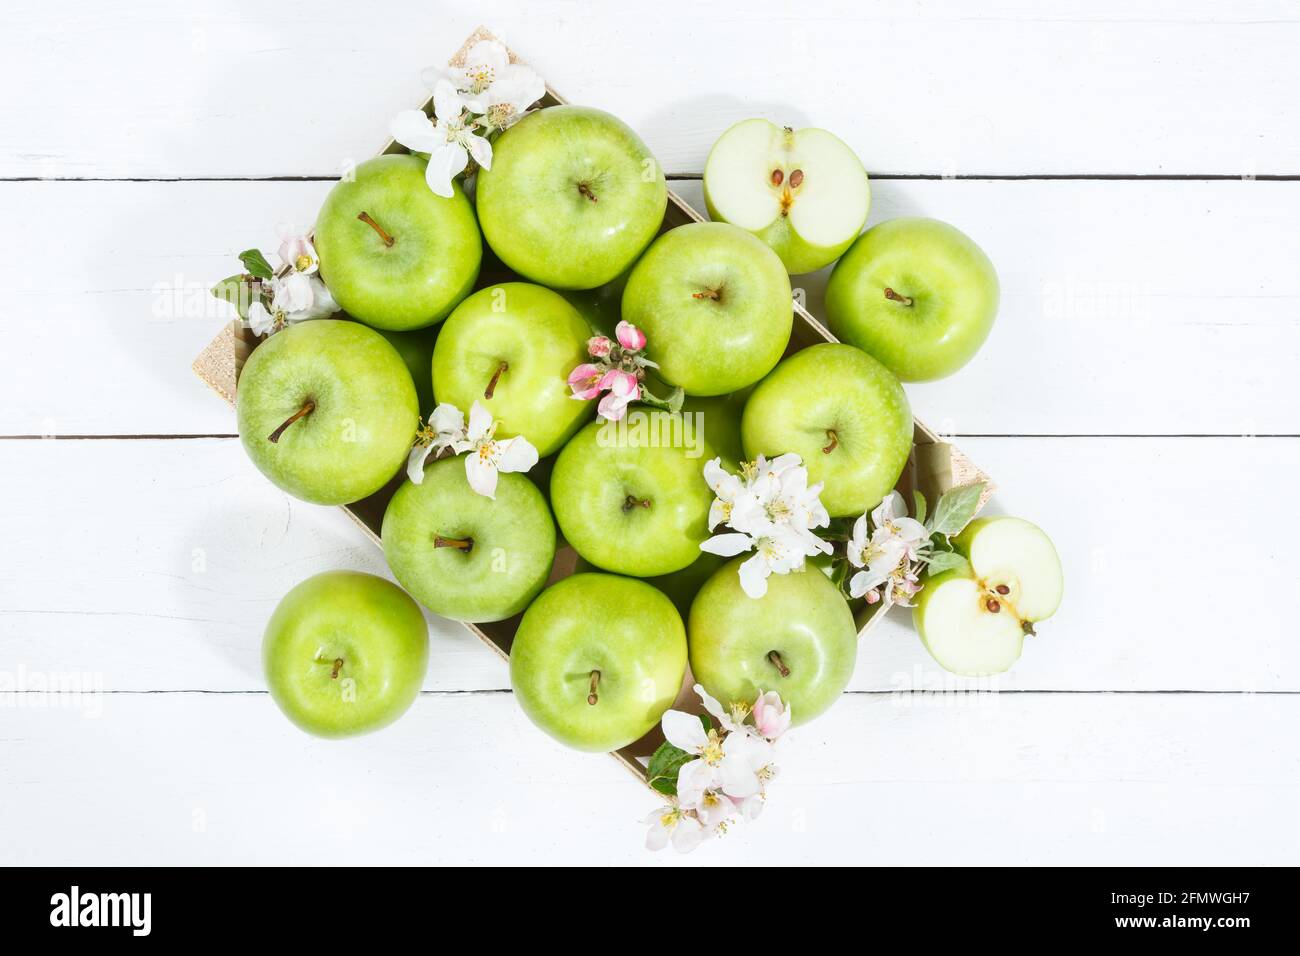 Apples fruits green apple fruit box on wooden board with leaves and blossoms food Stock Photo